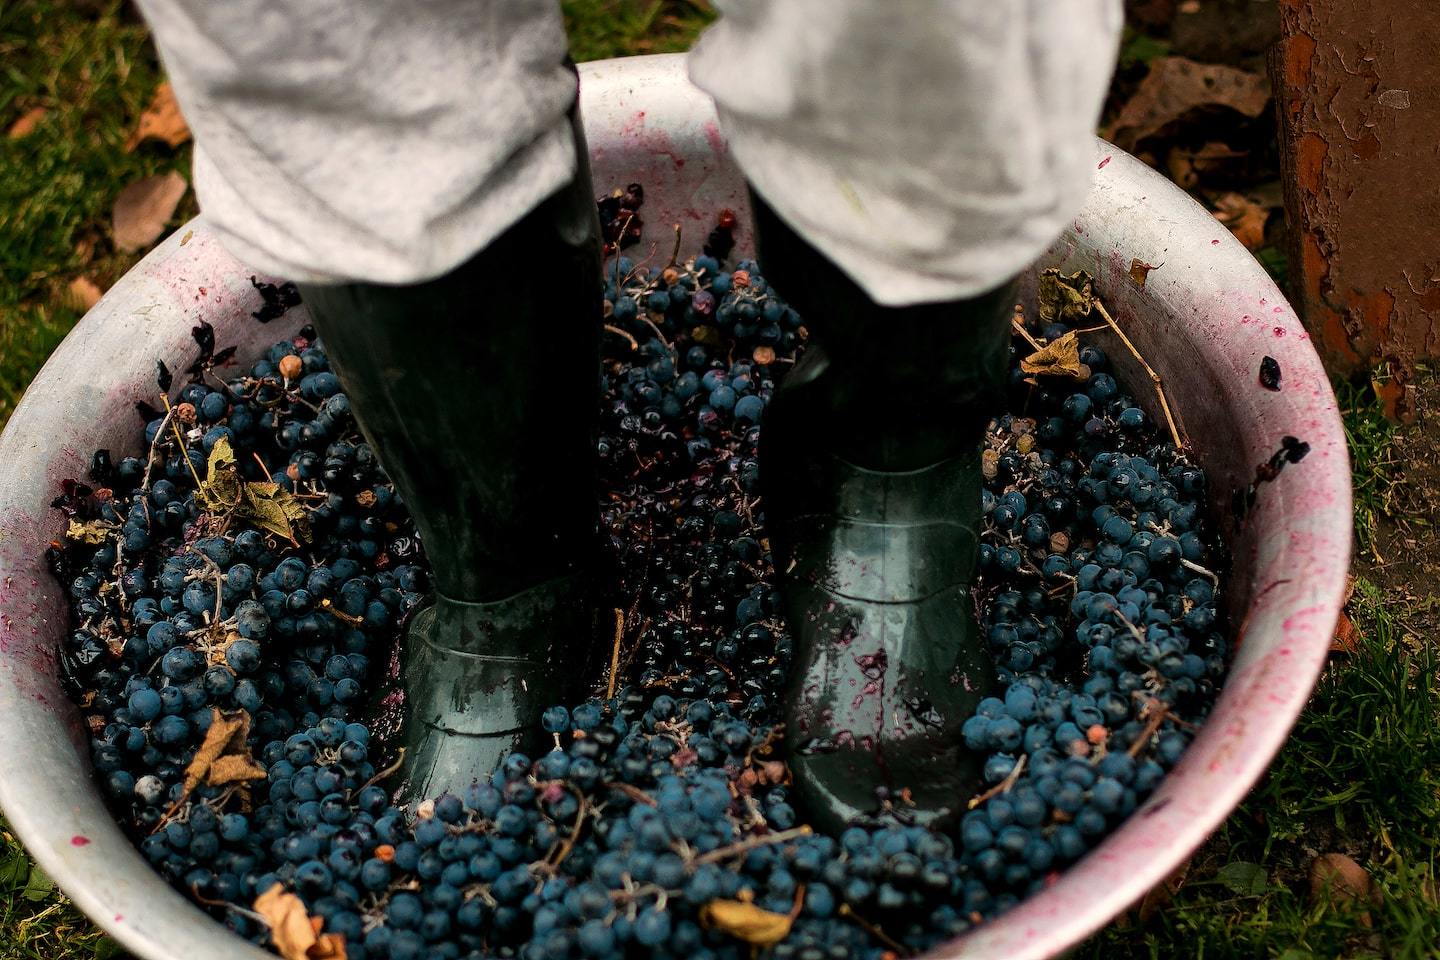 person crushing grapes with their feet